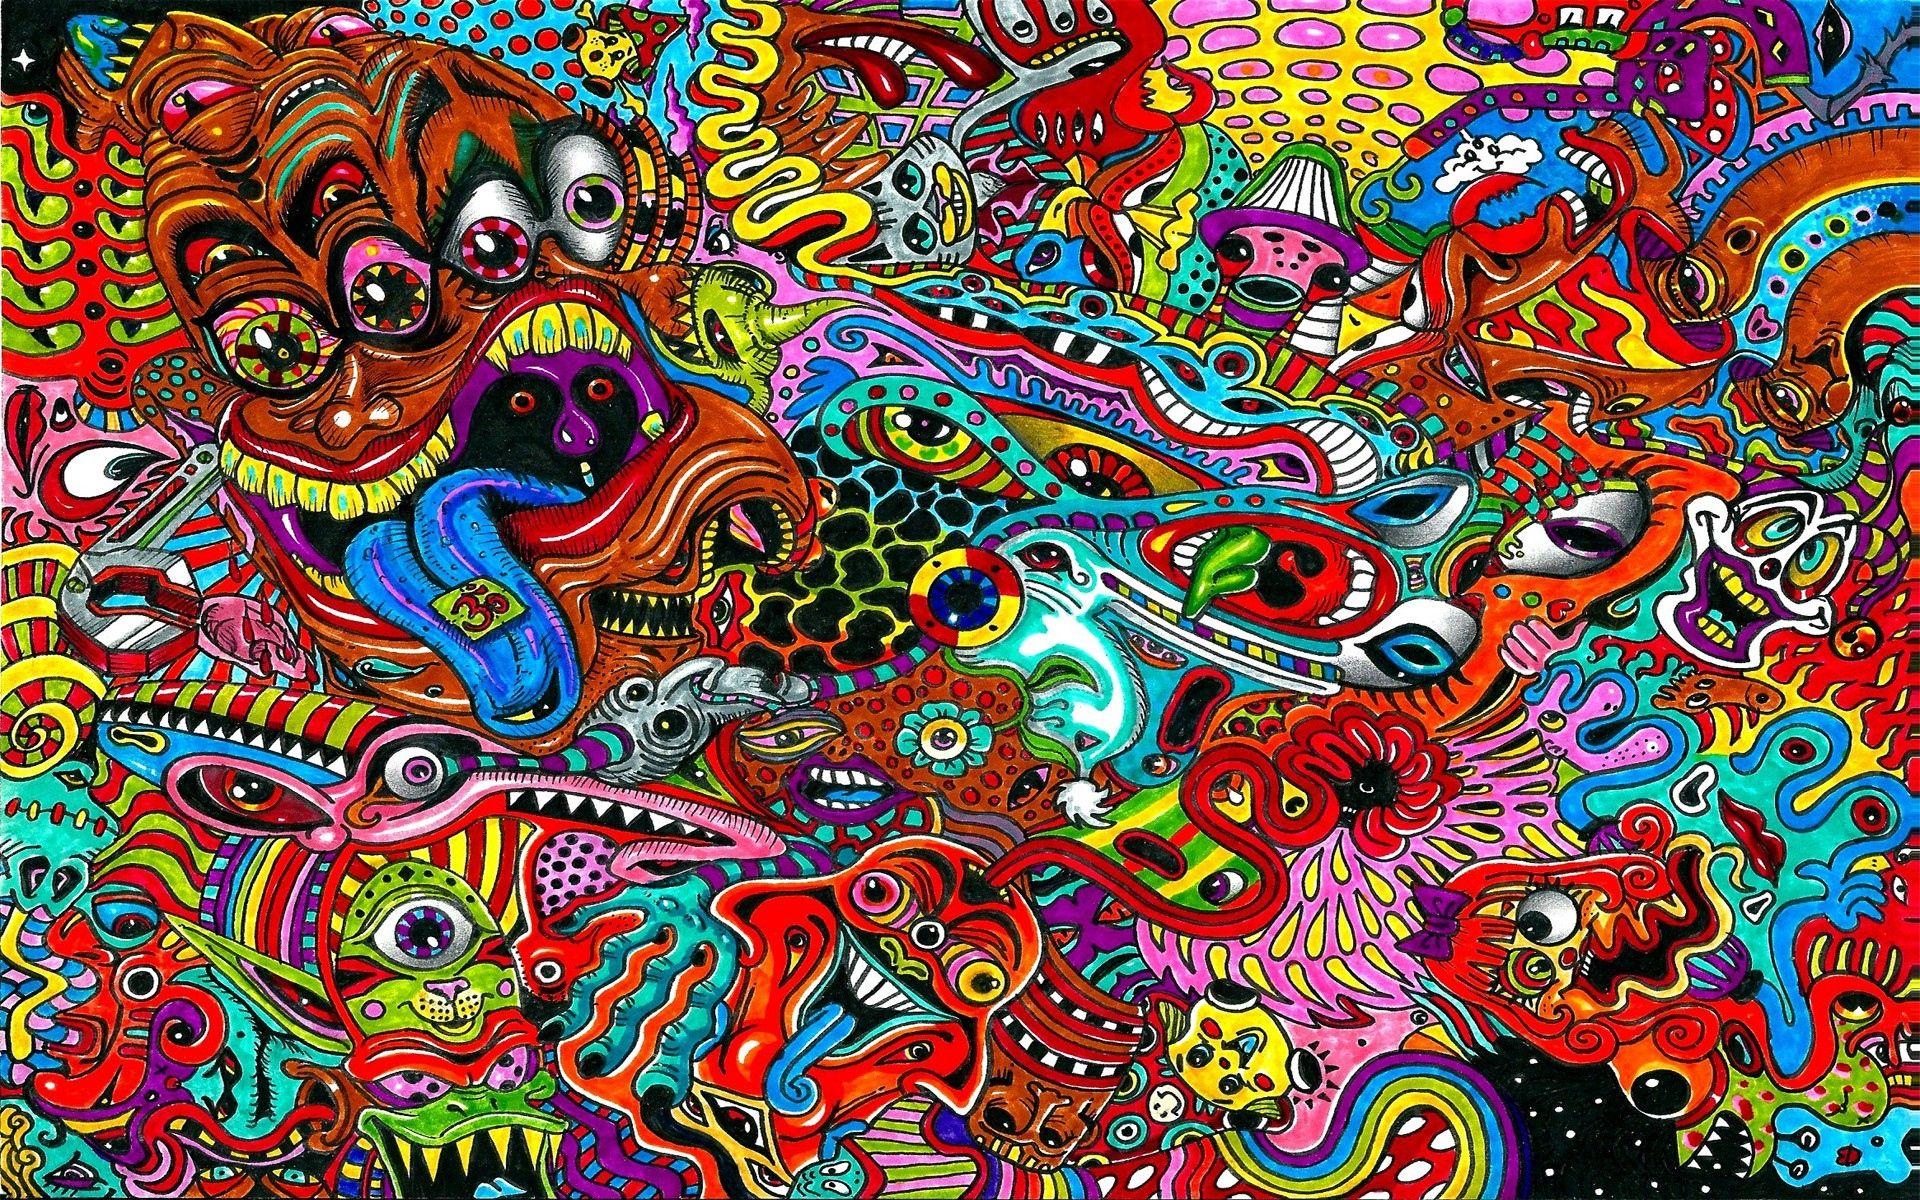 Download wallpaper 1920x1200 drawing, surreal, colorful, psychedelic